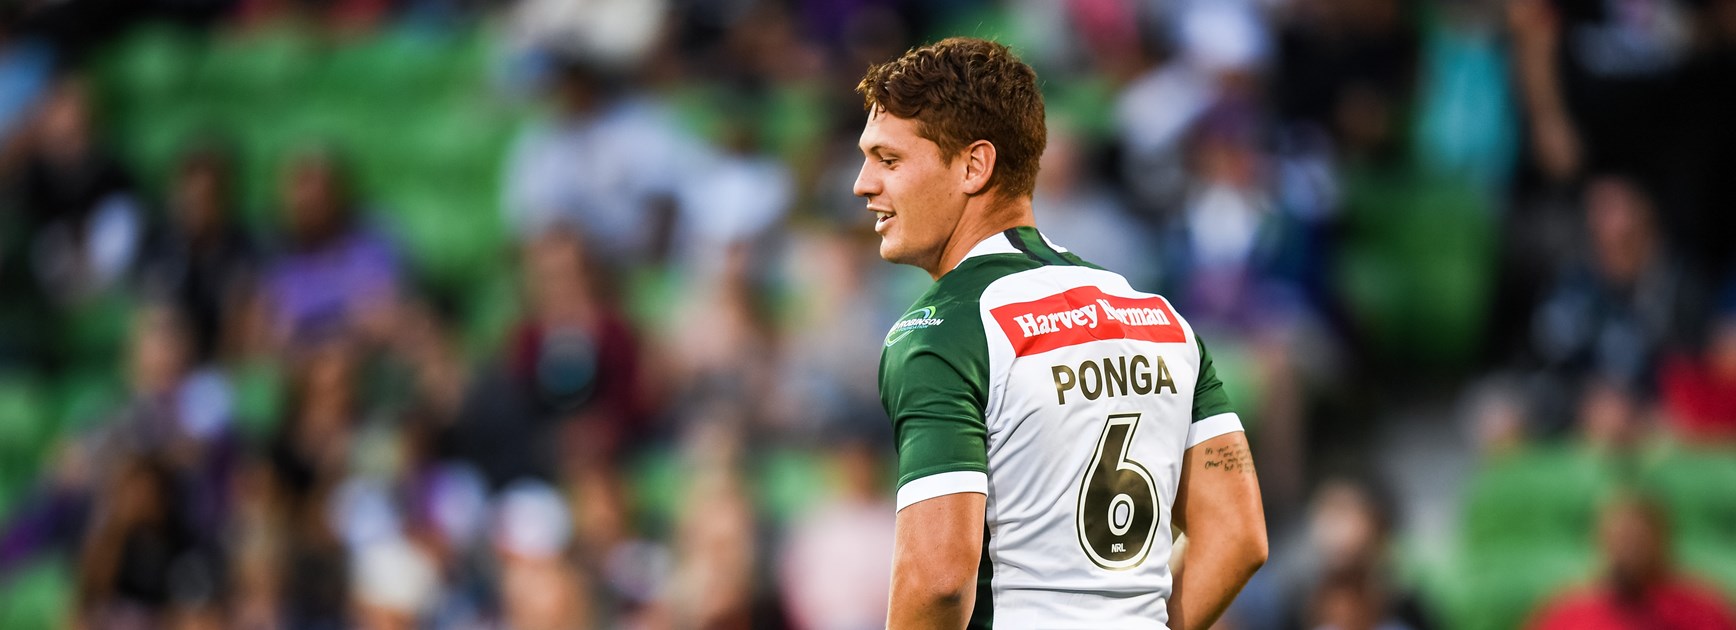 Kalyn Ponga during the 2019 All Stars game.